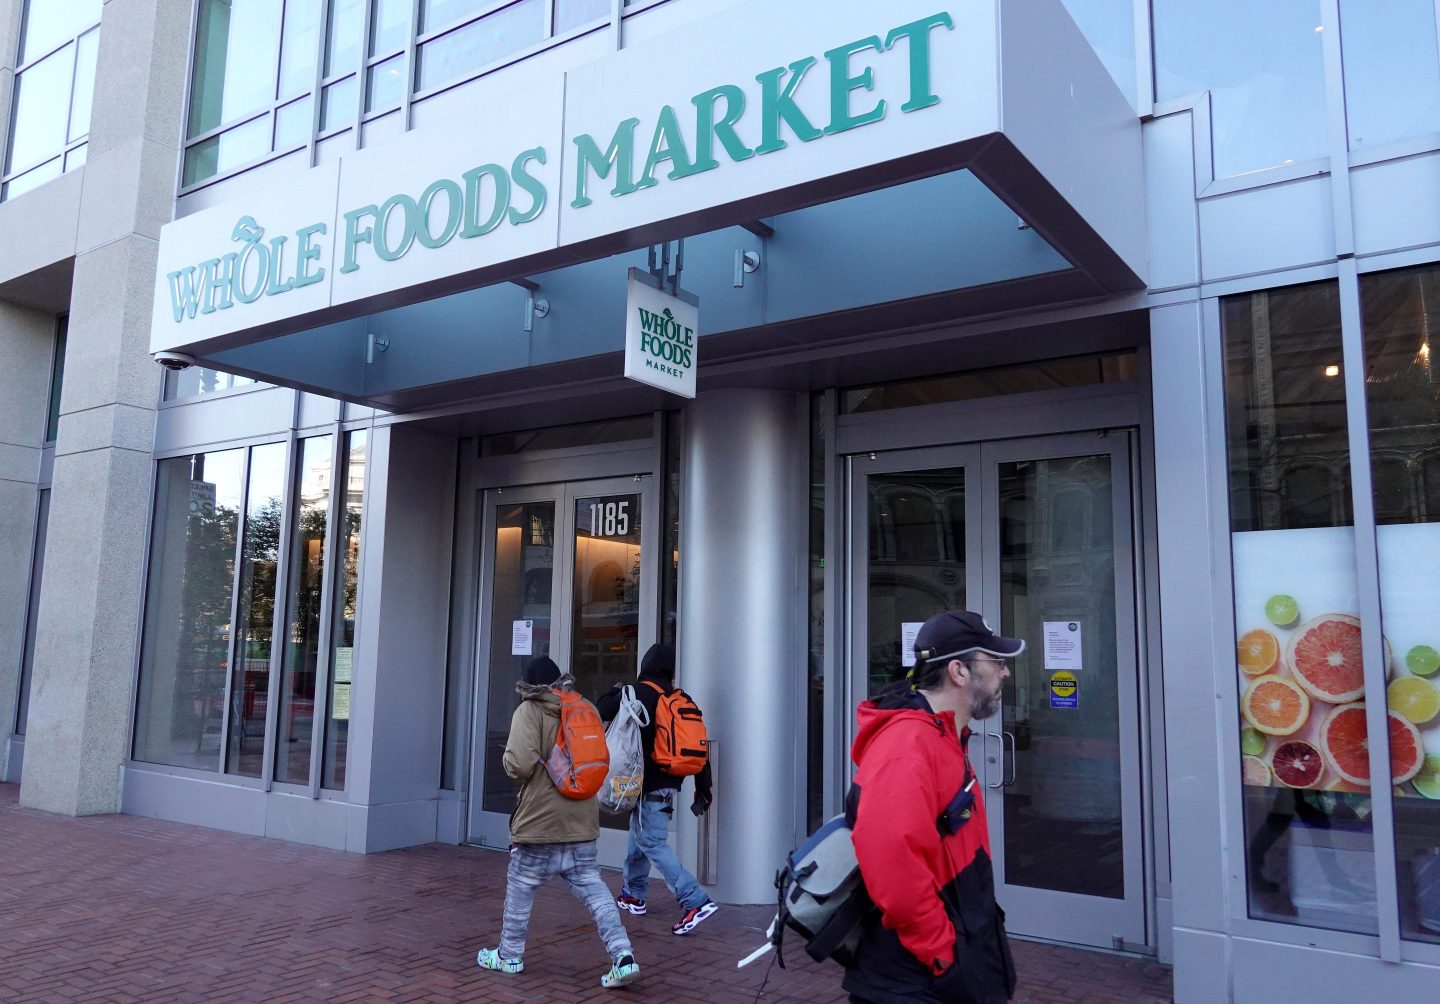 SAN FRANCISCO, CALIFORNIA &#8211; APRIL 12: Pedestrians walk by a closed Whole Foods store on April 12, 2023 in San Francisco, California. Whole Foods has temporarily closed one of its San Francisco locations due to rampant shoplifting and continued threats to workers and customers. The store opened one year ago and has struggled with deteriorating street conditions including open drug use and other crimes near the store. (Photo by Justin Sullivan/Getty Images)